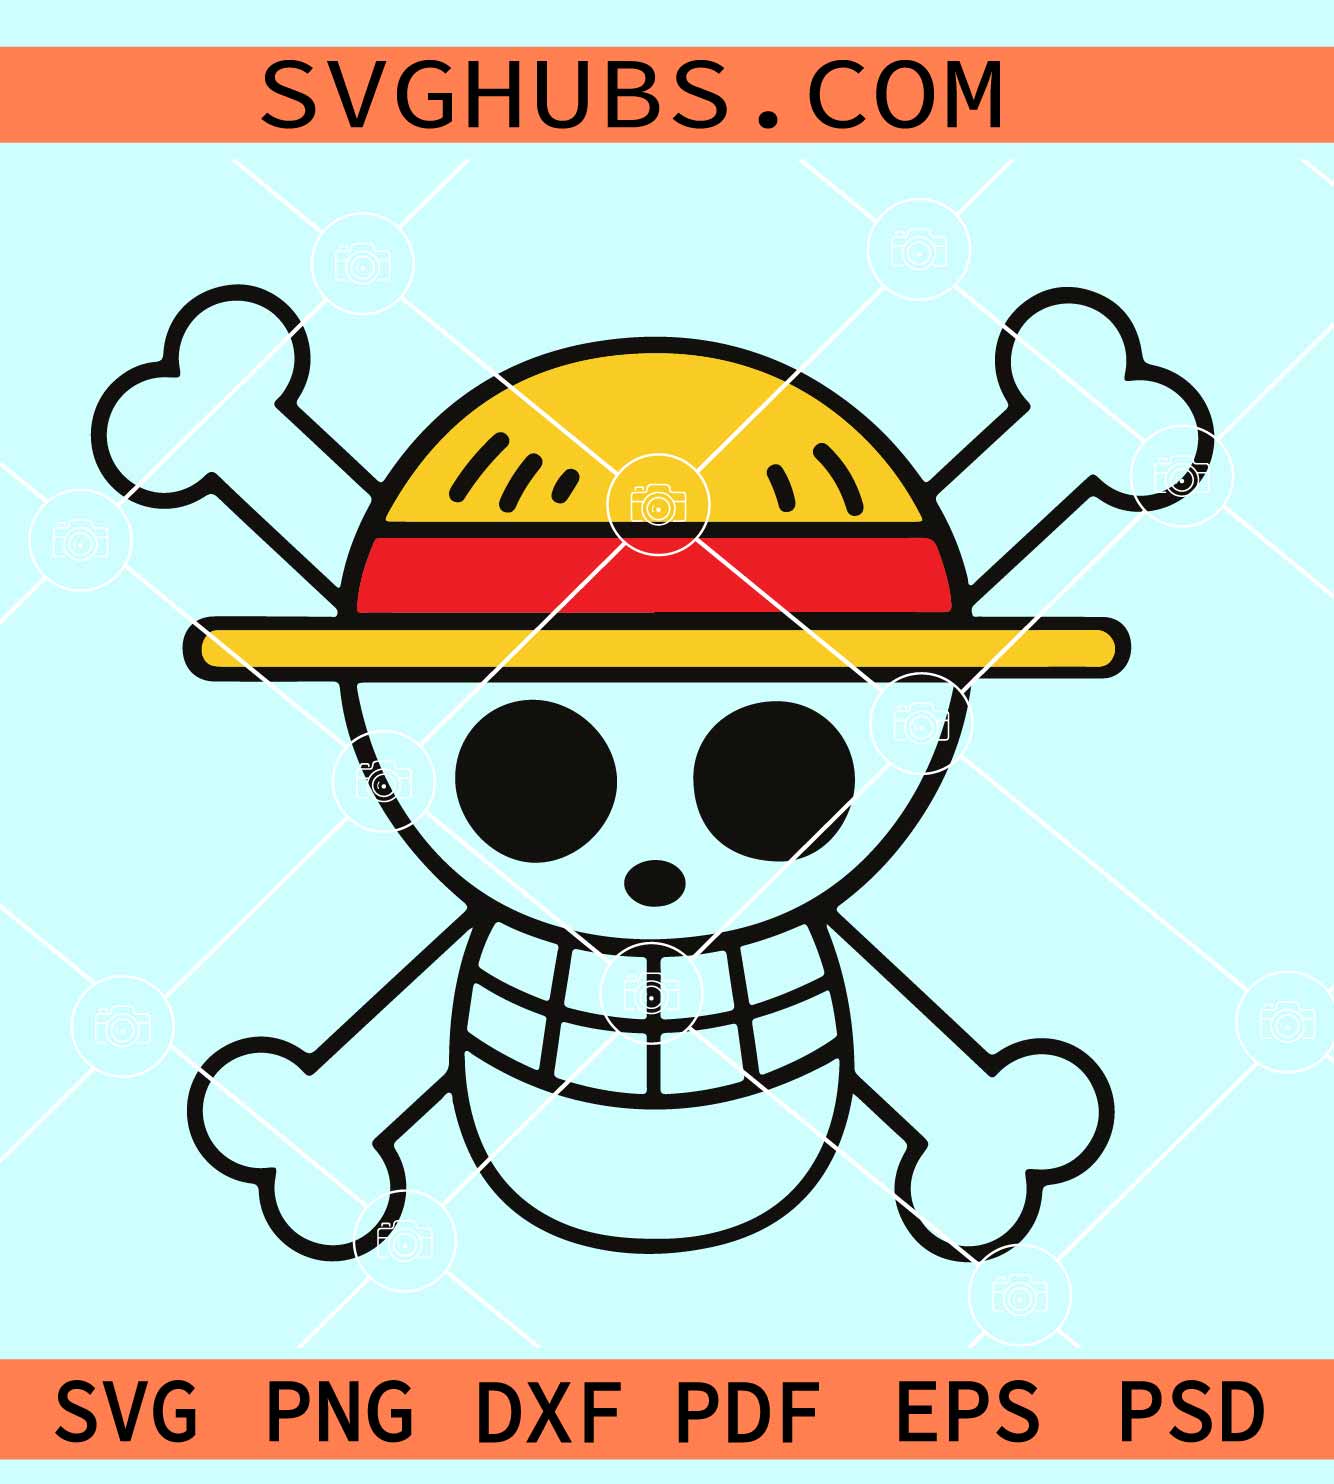 Top 99 one piece logo svg most viewed and downloaded